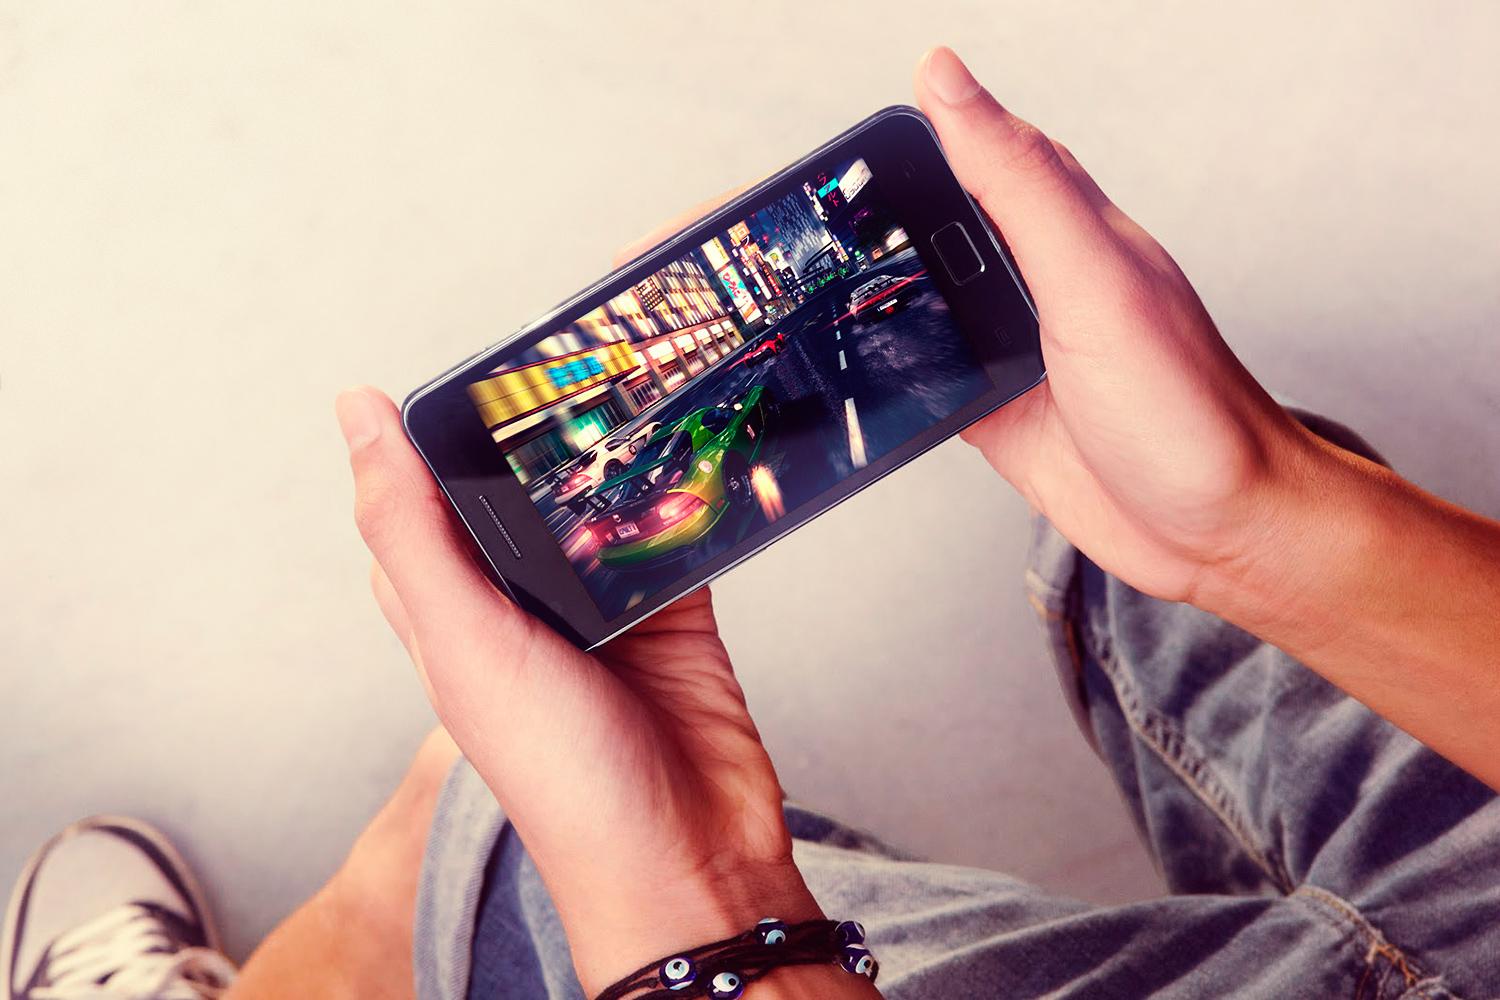 Google Play Games: Did you know about Android's built-in Arcade Games in  most Android phones?